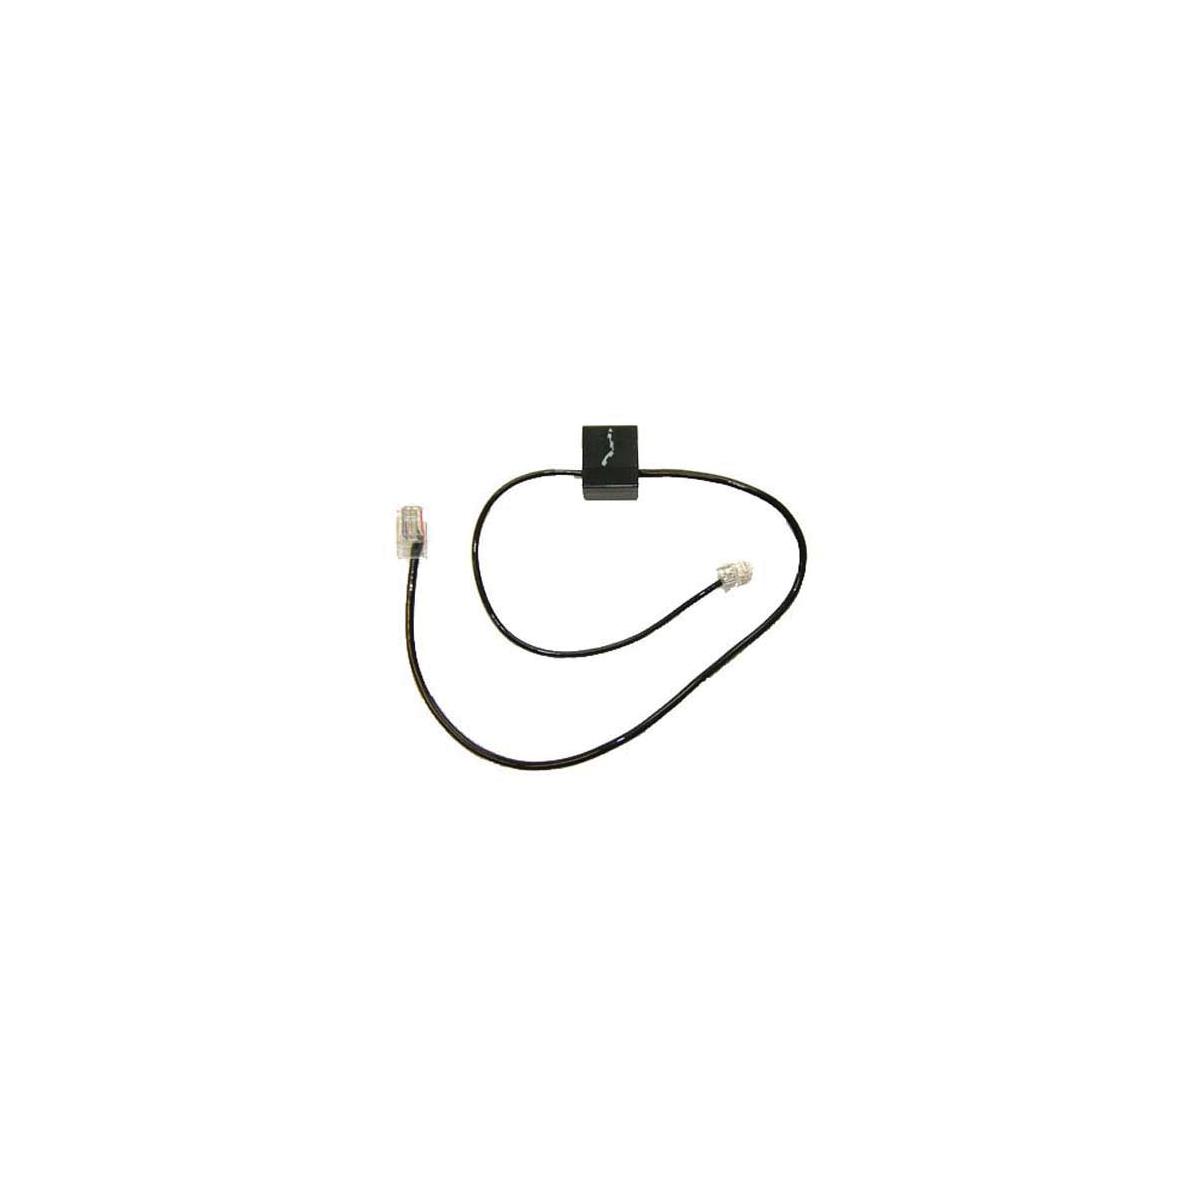 Image of Plantronics Spare Telephone Interface Cable